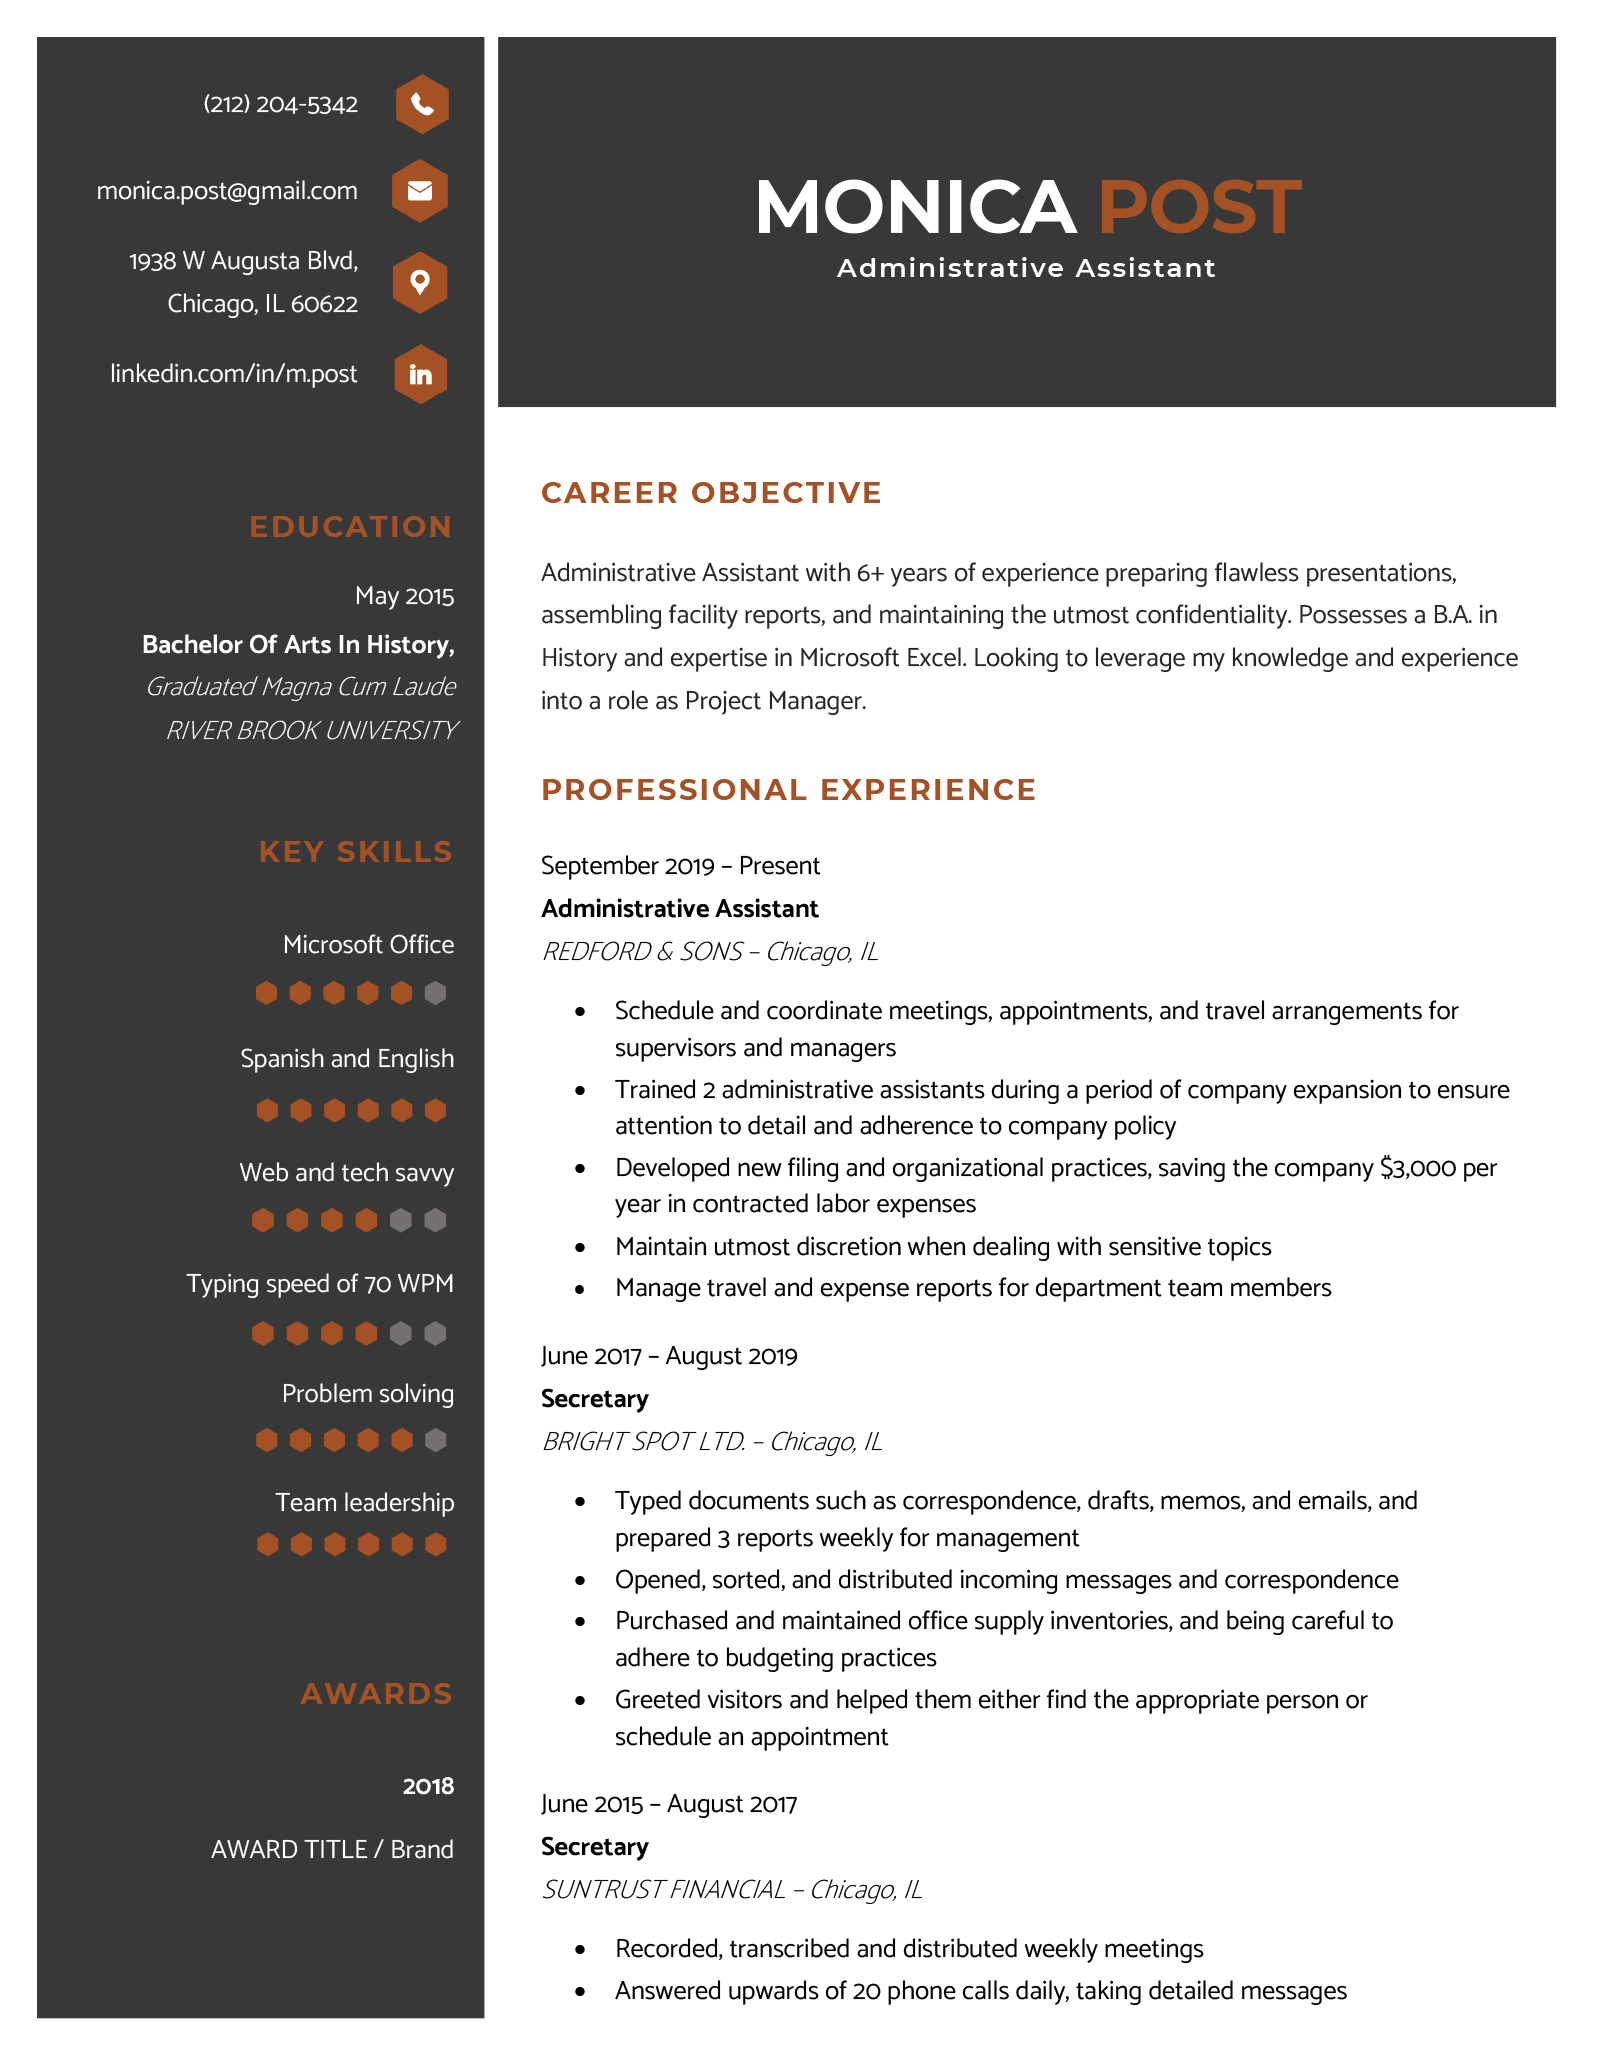 A resume template with a red LinkedIn logo (and other contact information icons), and sections for the applicant's career objective, professional experience, education, key skills, and awards